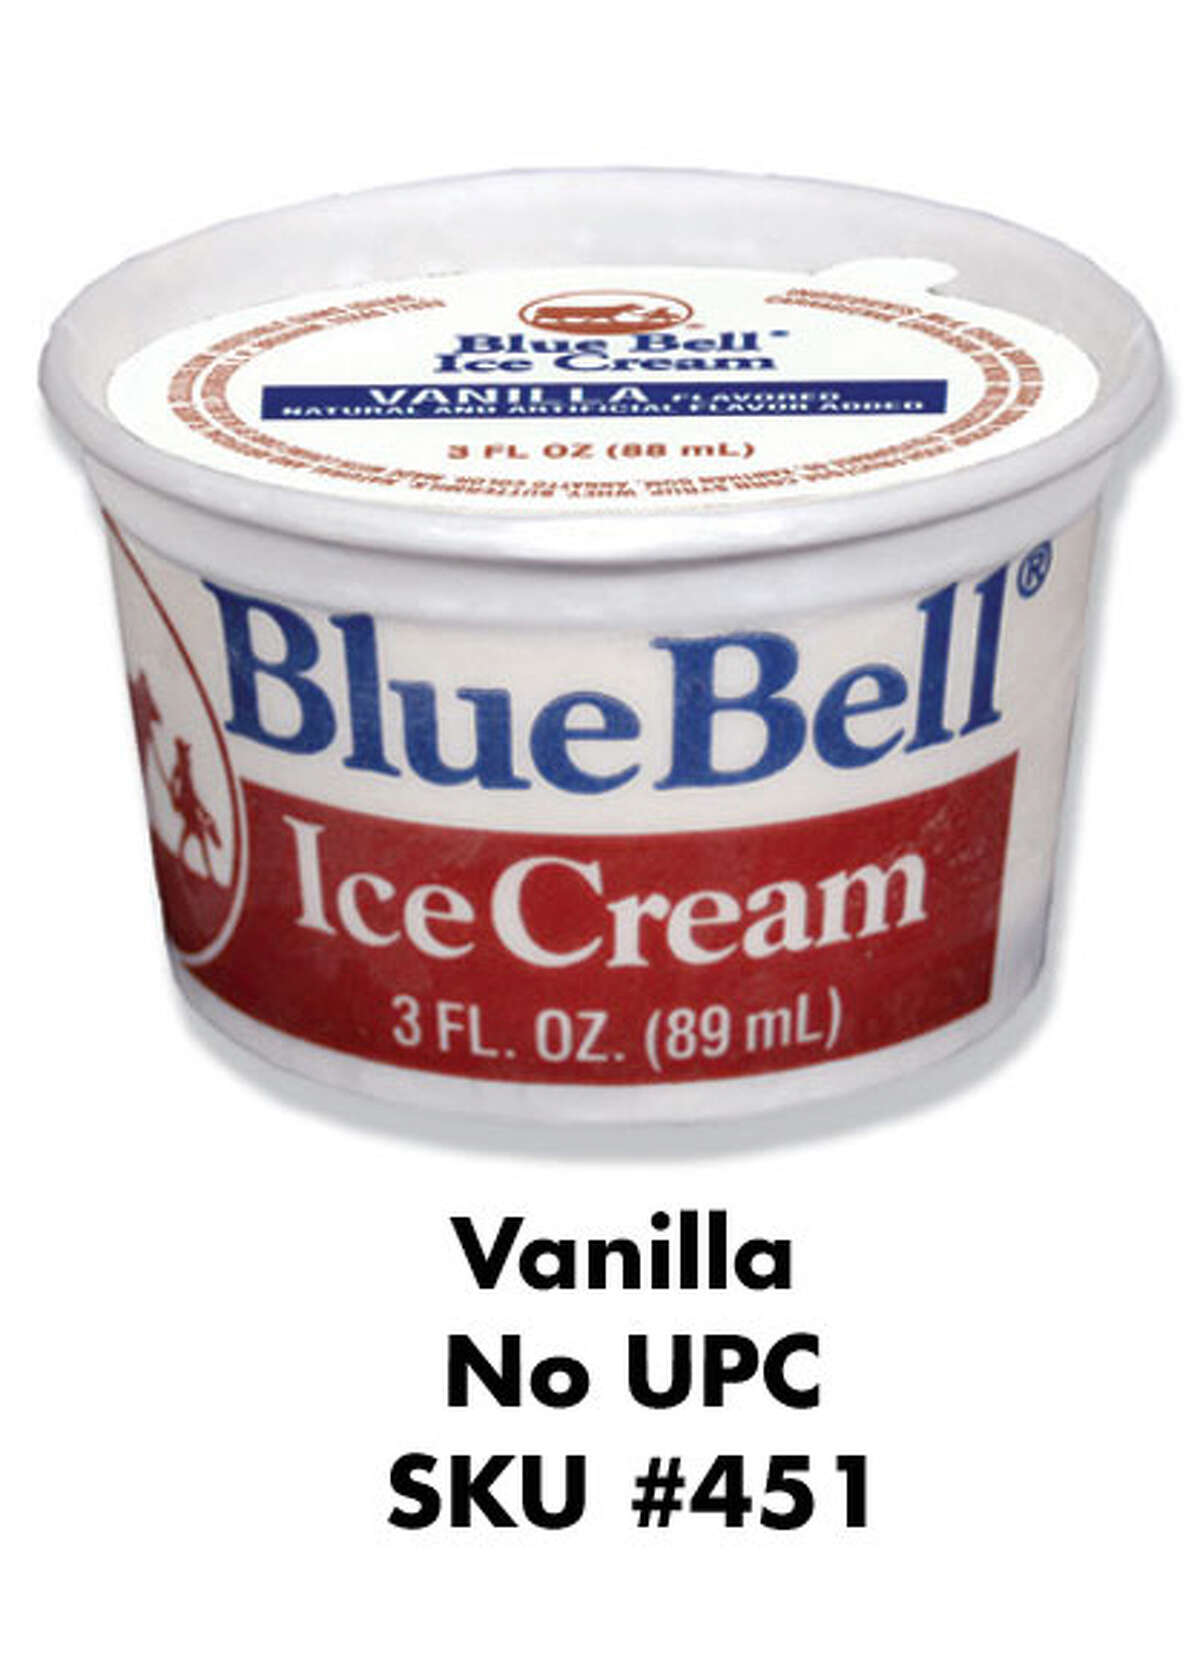 These items have been recalled by Blue Bell Creameries in Brenham, Texas as part of a listeria outbreak.